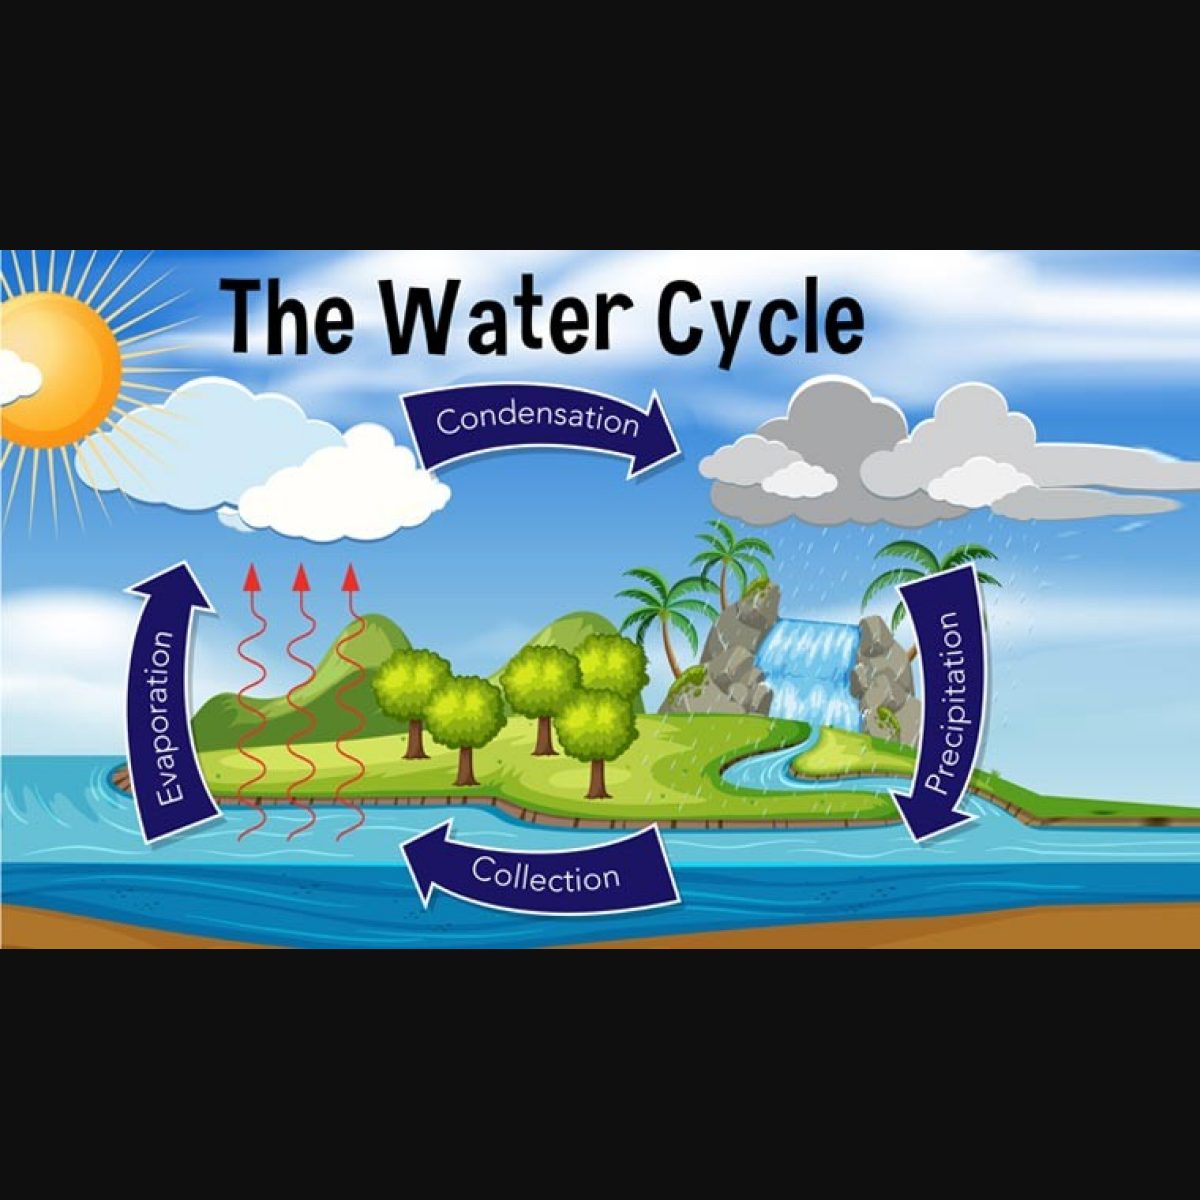 New diagrams depict an alternate view of how humans impact water ...